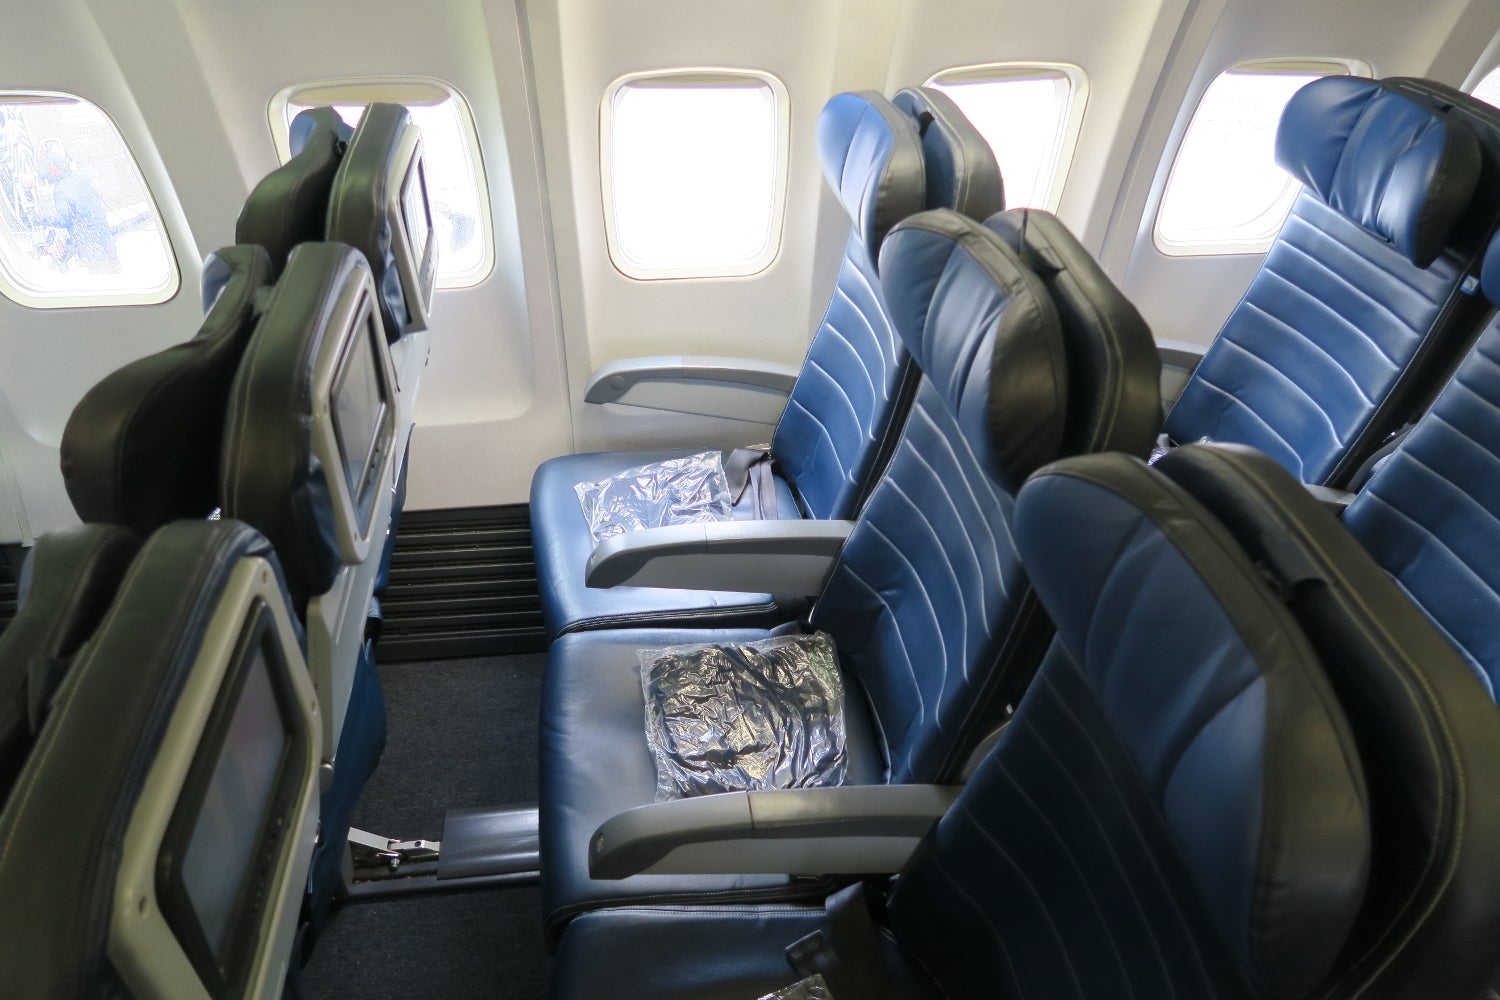 united airlines change seat assignments